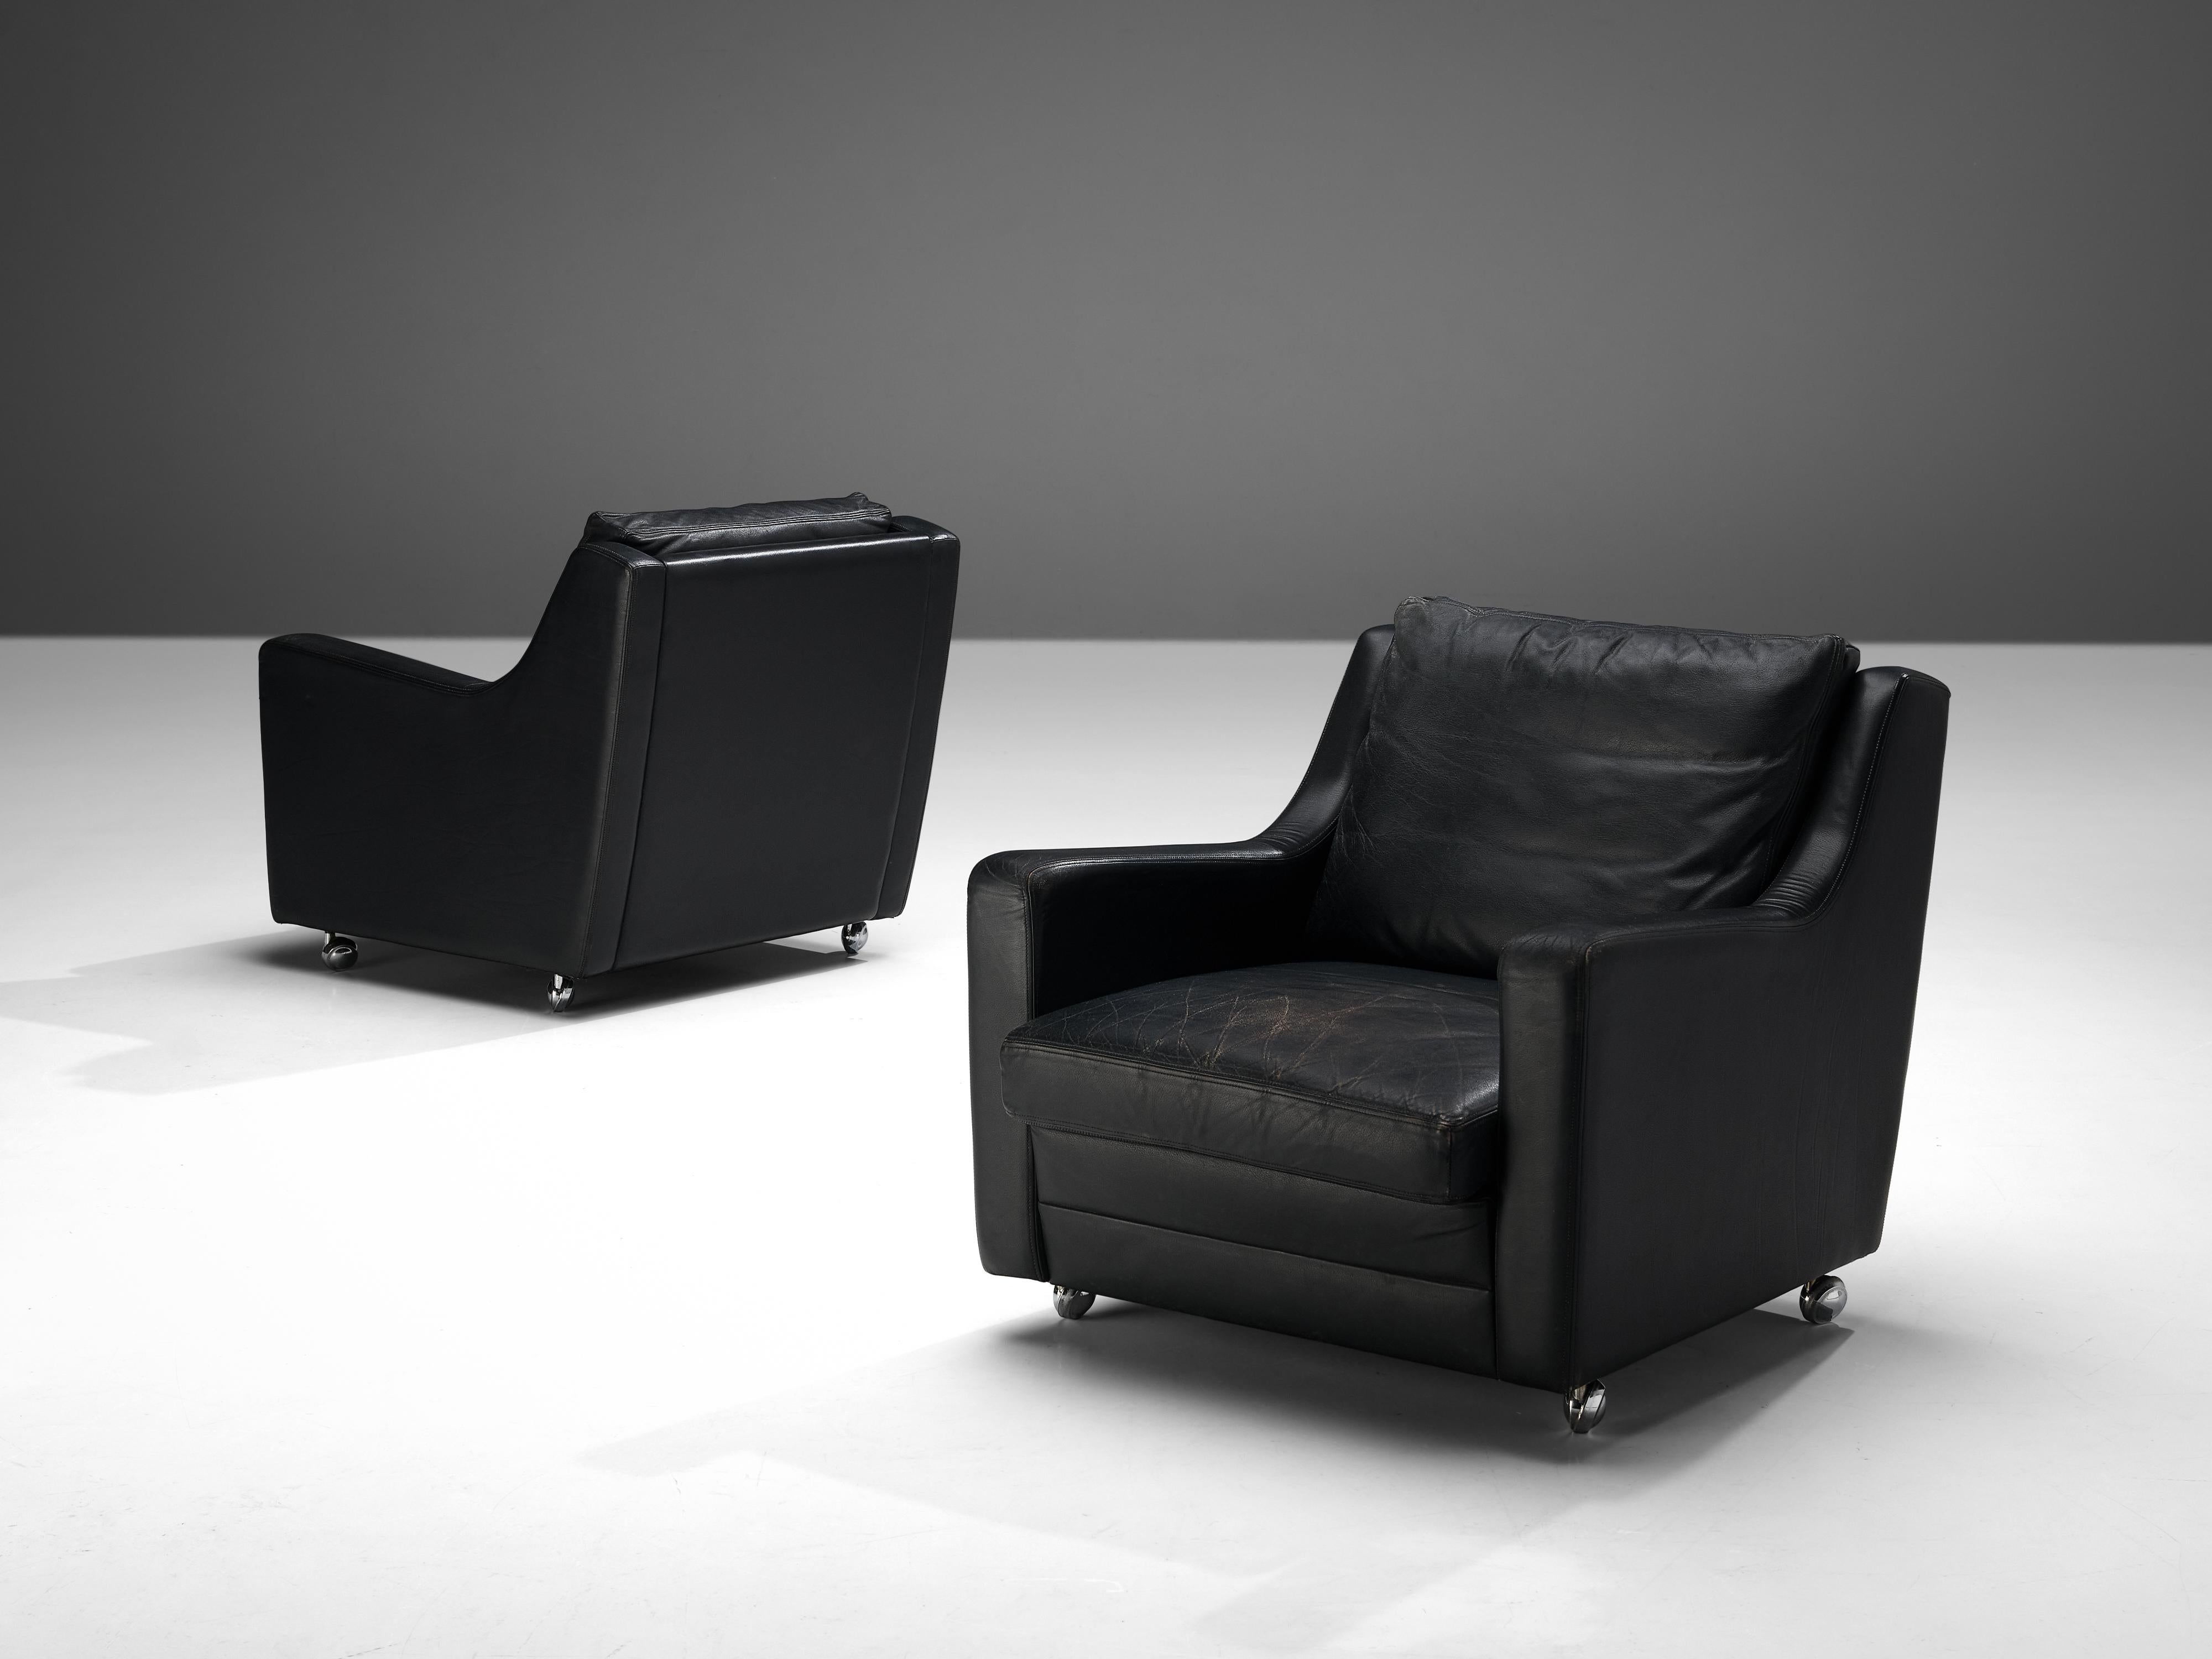 Pair of lounge chairs, black leather, steel, Europe, 1970s

The design of this stunning pair of lounge chairs features beautiful, clear lines, contributing to a sculptural appearance. The backrest smoothly runs over into the armrests creating an